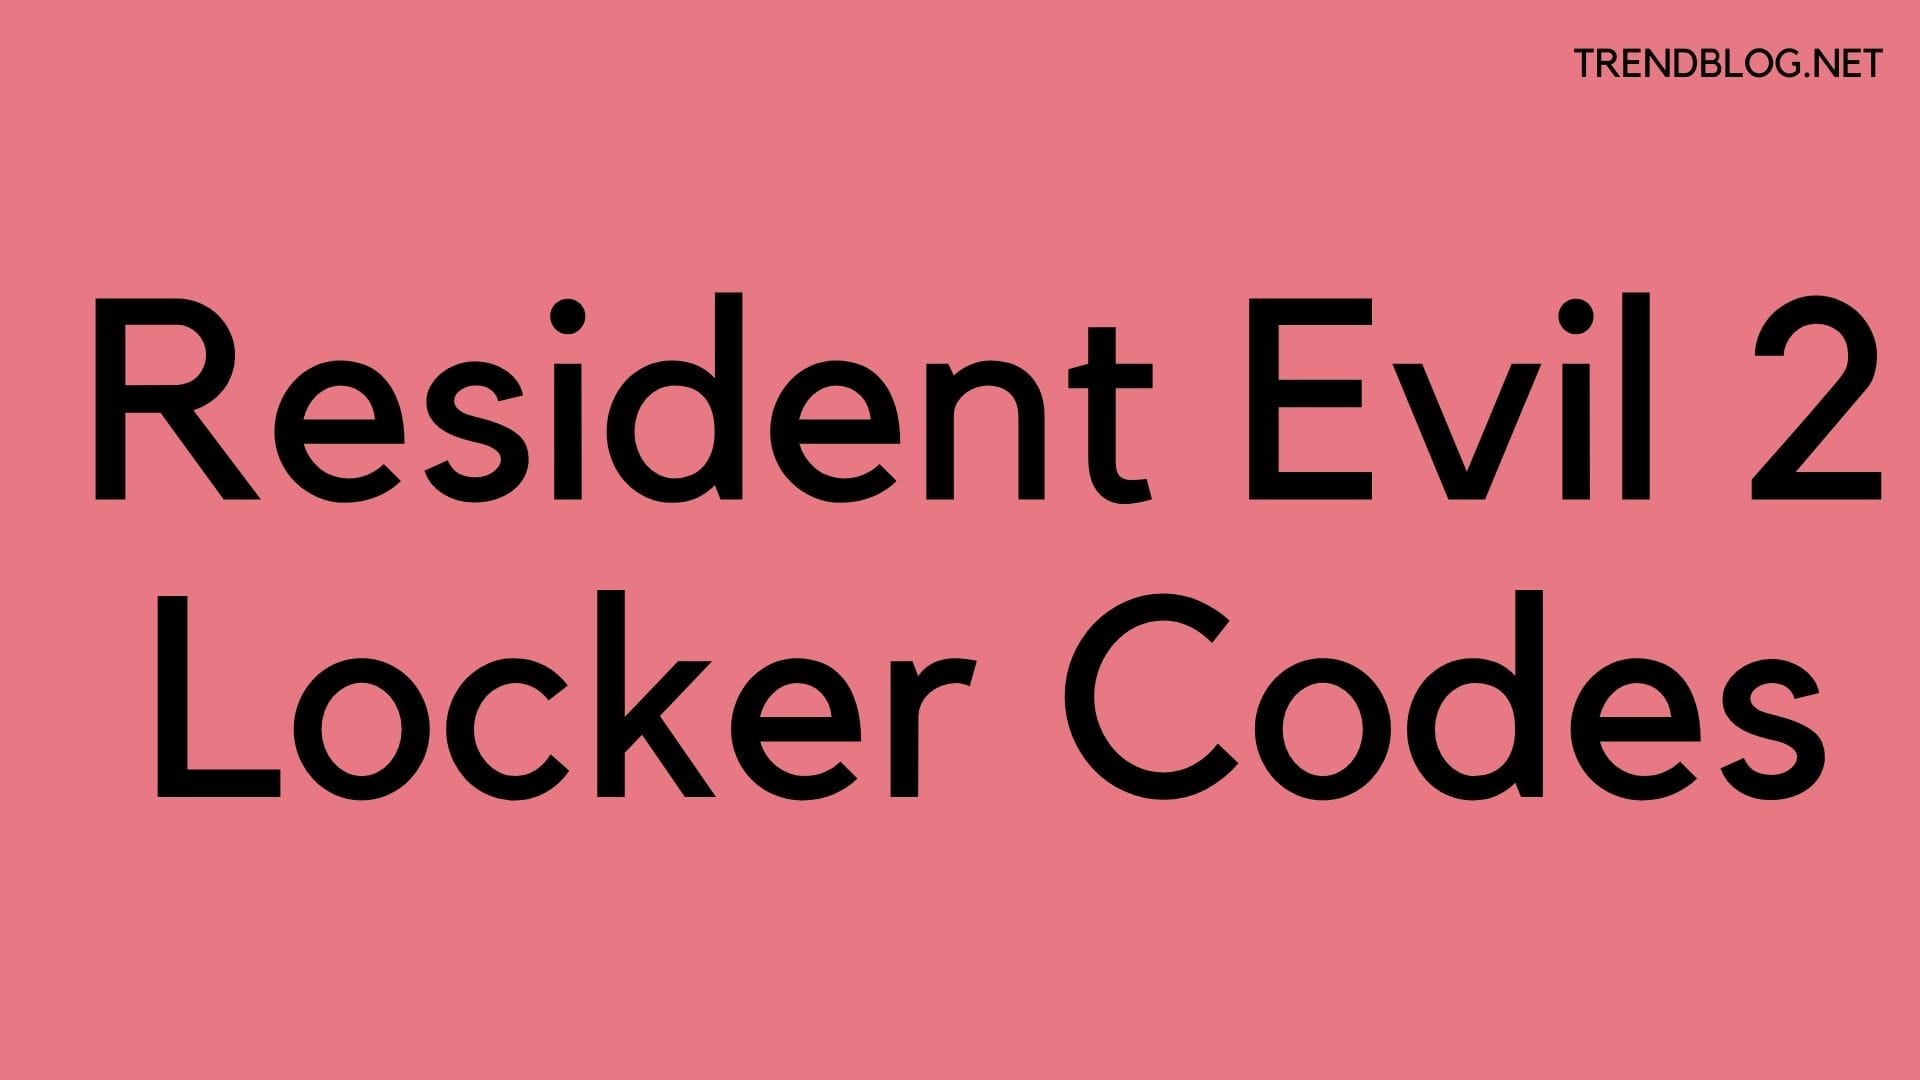 Resident Evil 2 Locker Codes: Safe and Solutions Are Here